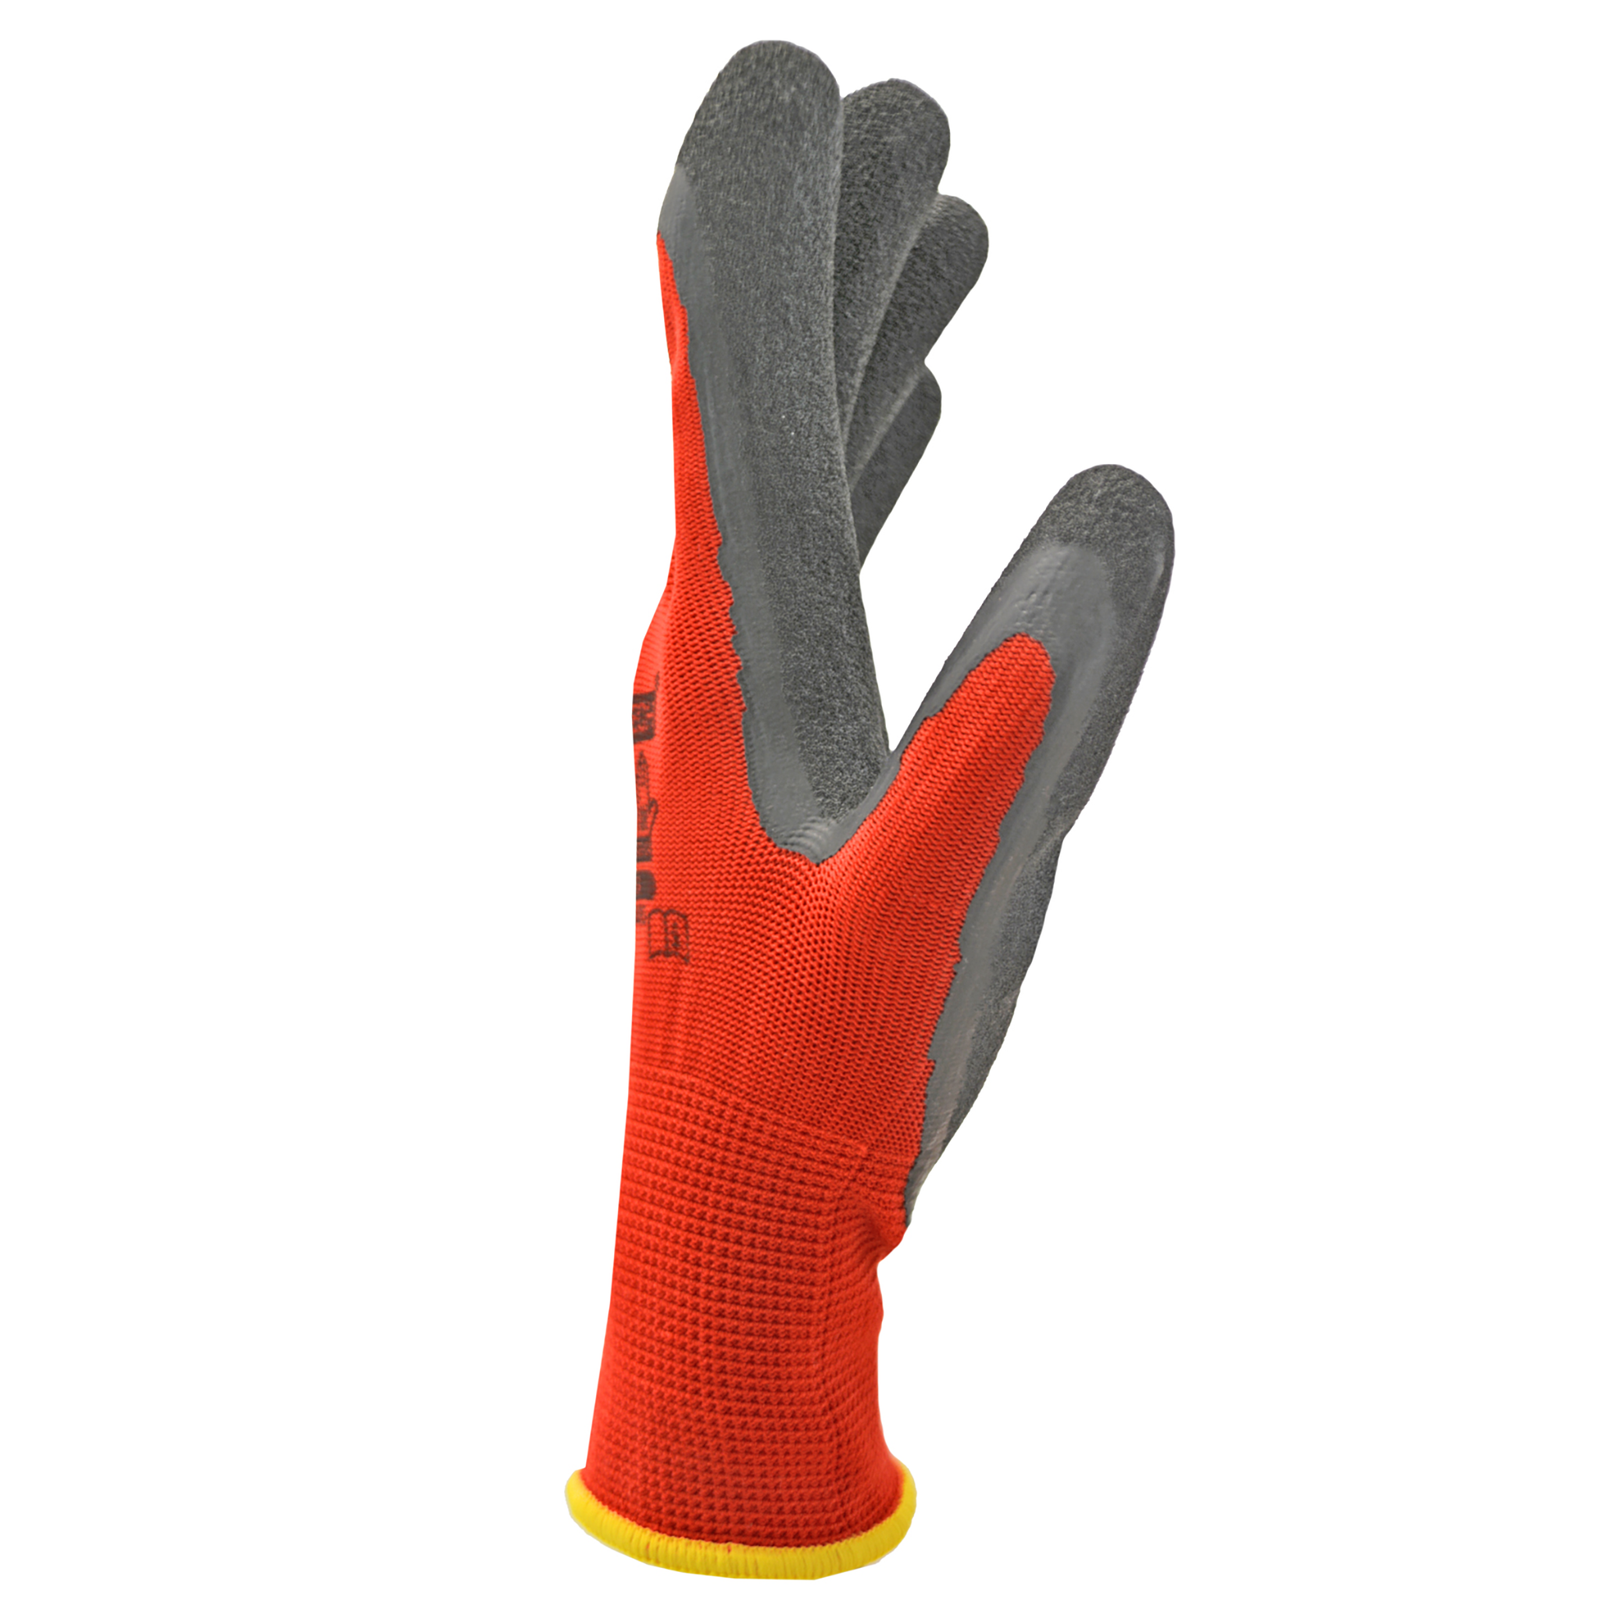 Side view of red and back safety work gloves with latex dipped palms